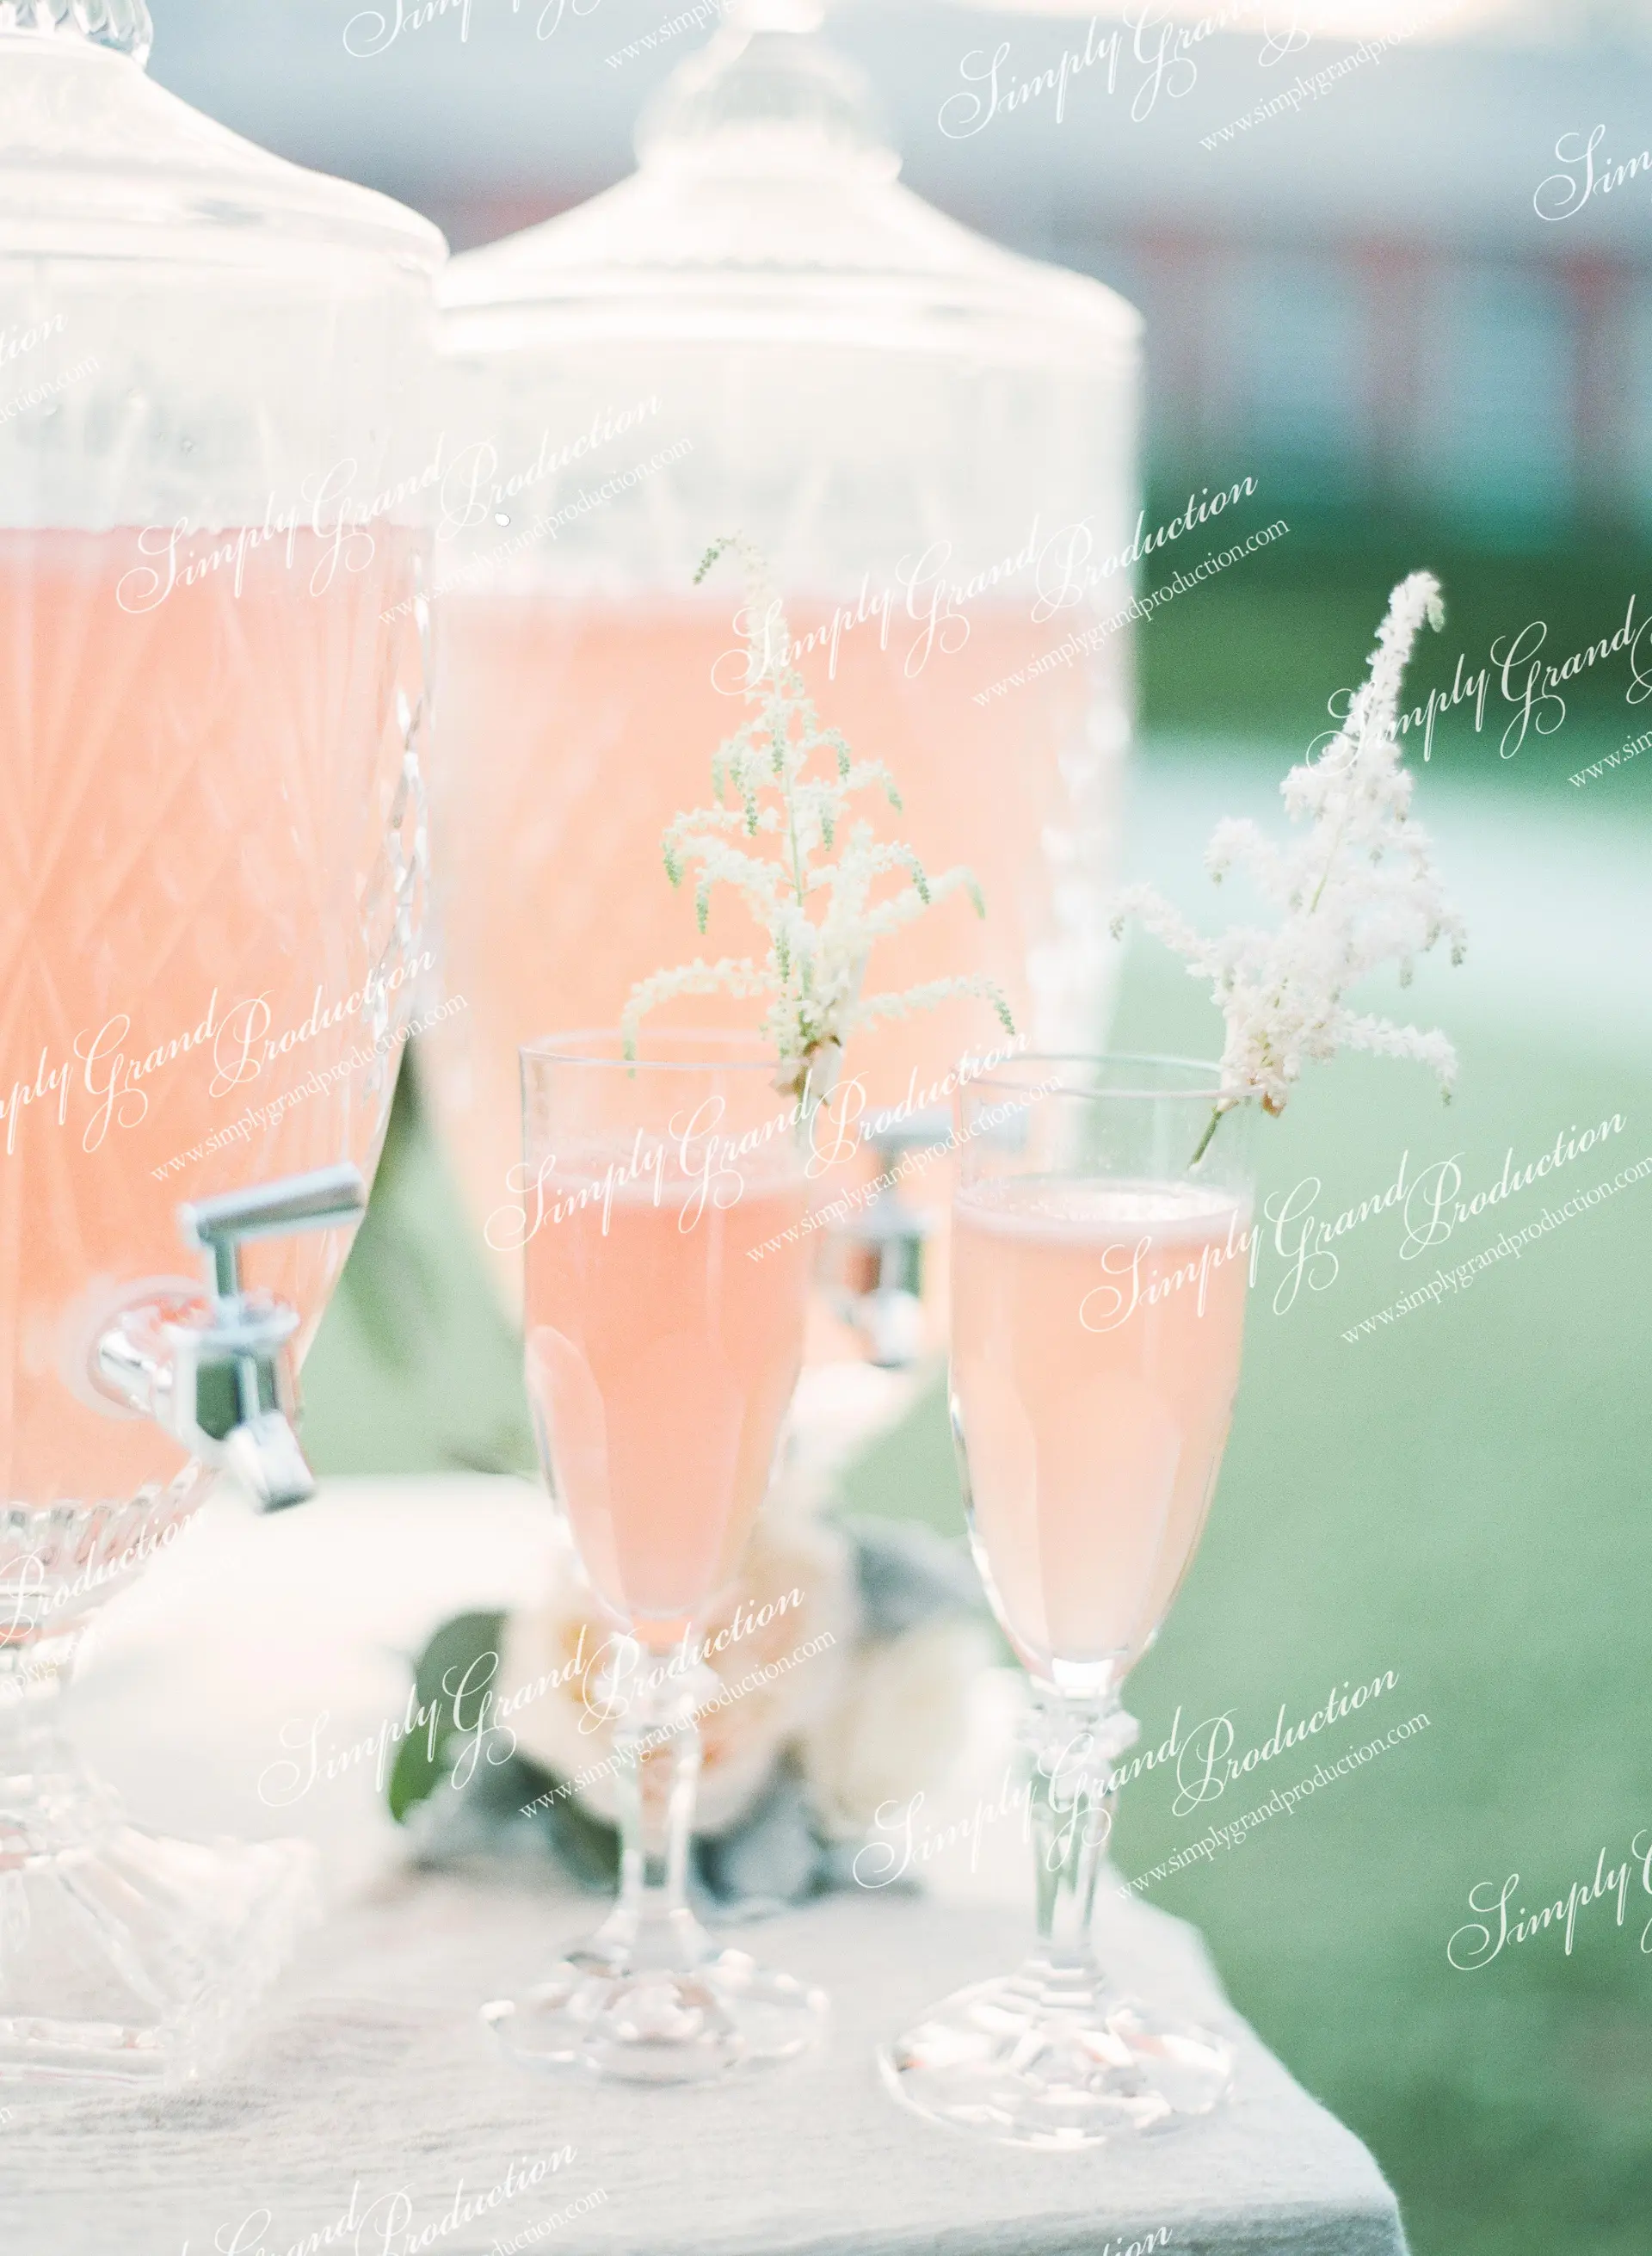 Simply_Grand_Production_Outdoor_wedding_decoration_photoshoot_Adventist_College_glassware_drinks_cocktails_2_15.jpg